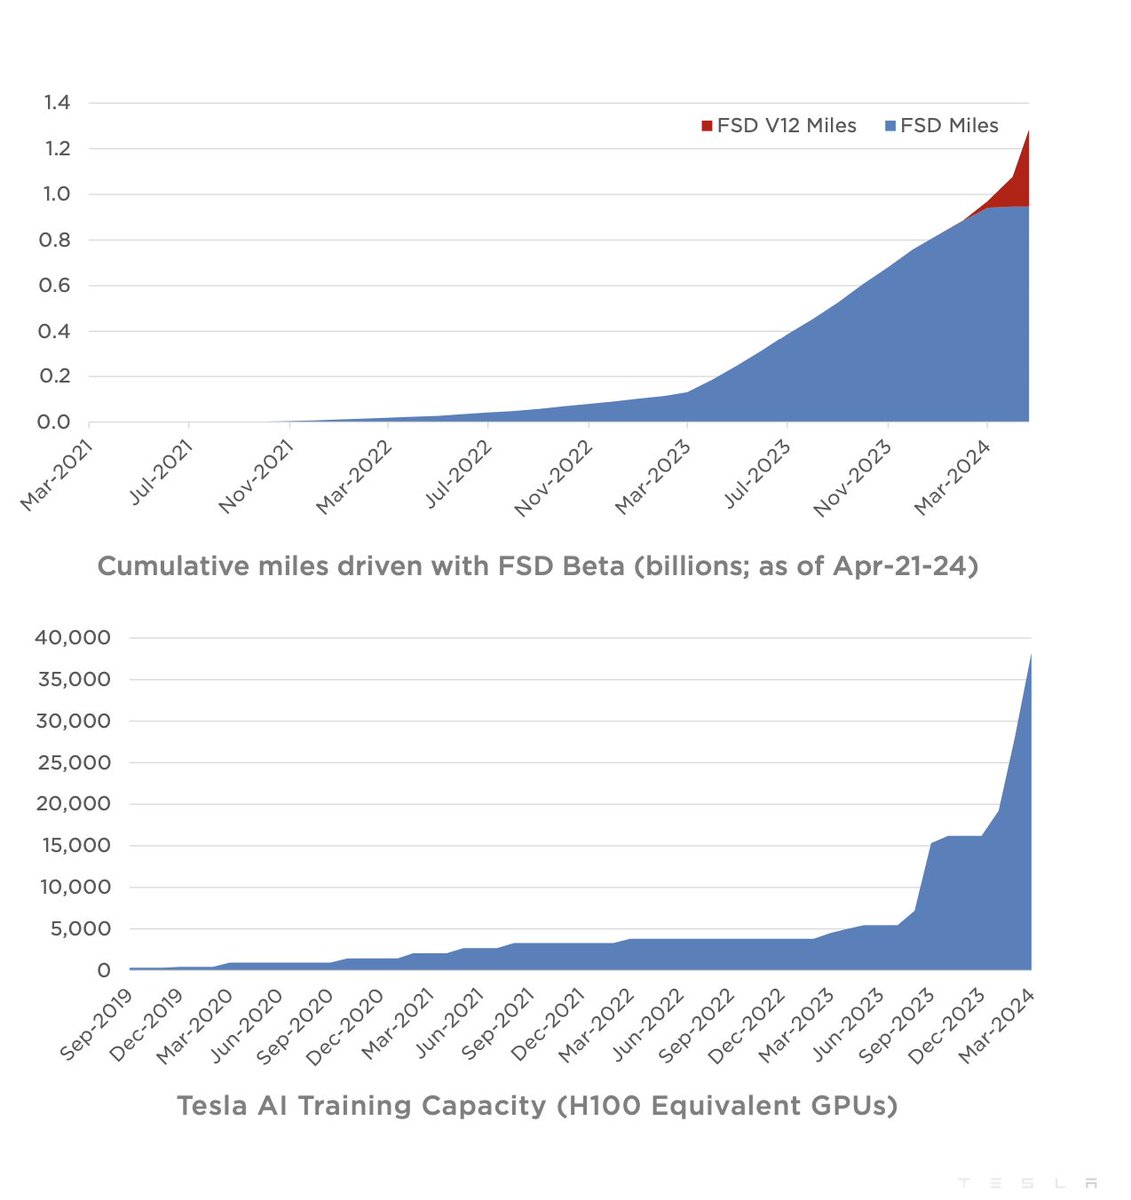 I'm still waiting for Tesla's FSD competition to show me their chart of AV's exponentially increasing miles driven as well as the skyrocketing compute and the 85k H100 computing power they're getting. Anyone?